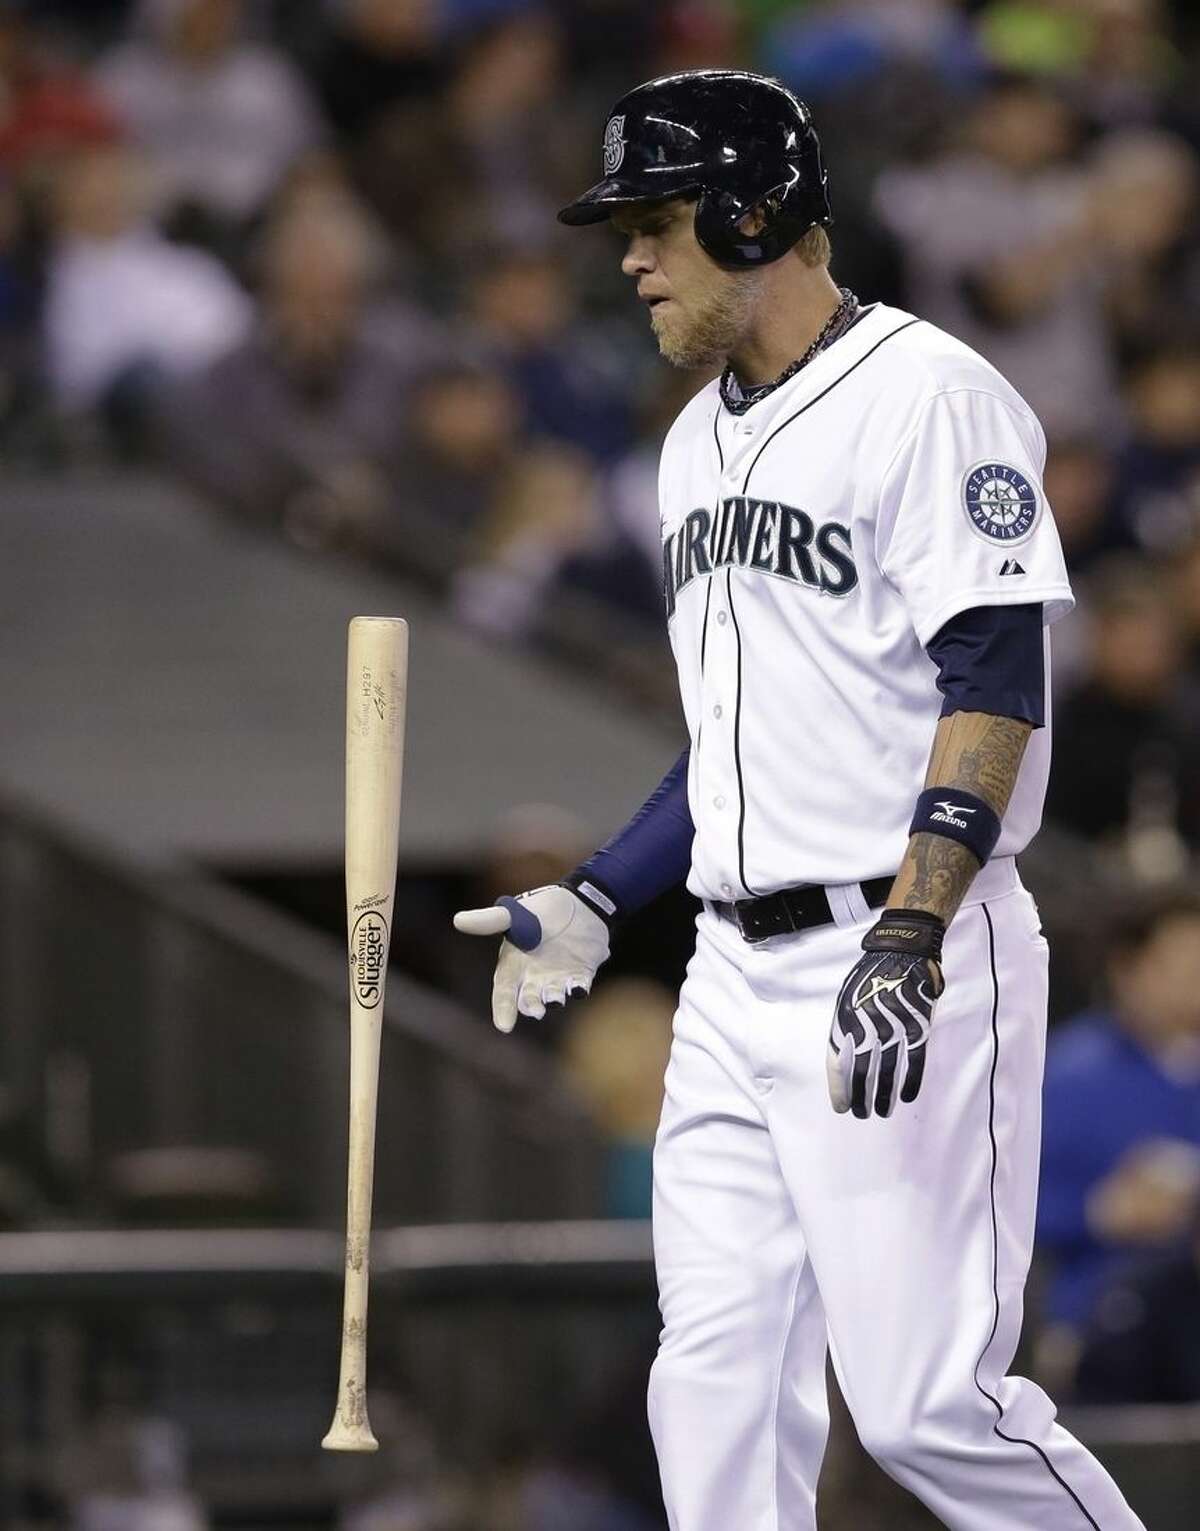 FILE - In this April 9, 2014, file photo, Seattle Mariners' Corey Hart flips his bat as he heads to the dugout after striking out against the Los Angeles Angels in the ninth inning of a baseball game in Seattle. The company that makes Louisville Slugger bats has announced a deal to sell the iconic brand to rival Wilson Sporting Goods Co. Wilson's deal to acquire the global brand, sales and innovation rights from Louisville Slugger's parent, Hillerich & Bradsby Co., still requires approval by H&B shareholders. Under terms of the agreement announced Monday, March 23, 2015, H&B will become Wilson's exclusive manufacturing partner for wood bats. H&B will continue to manufacture wood bats at its factory in Louisville, Kentucky. (AP Photo/Elaine Thompson, File)